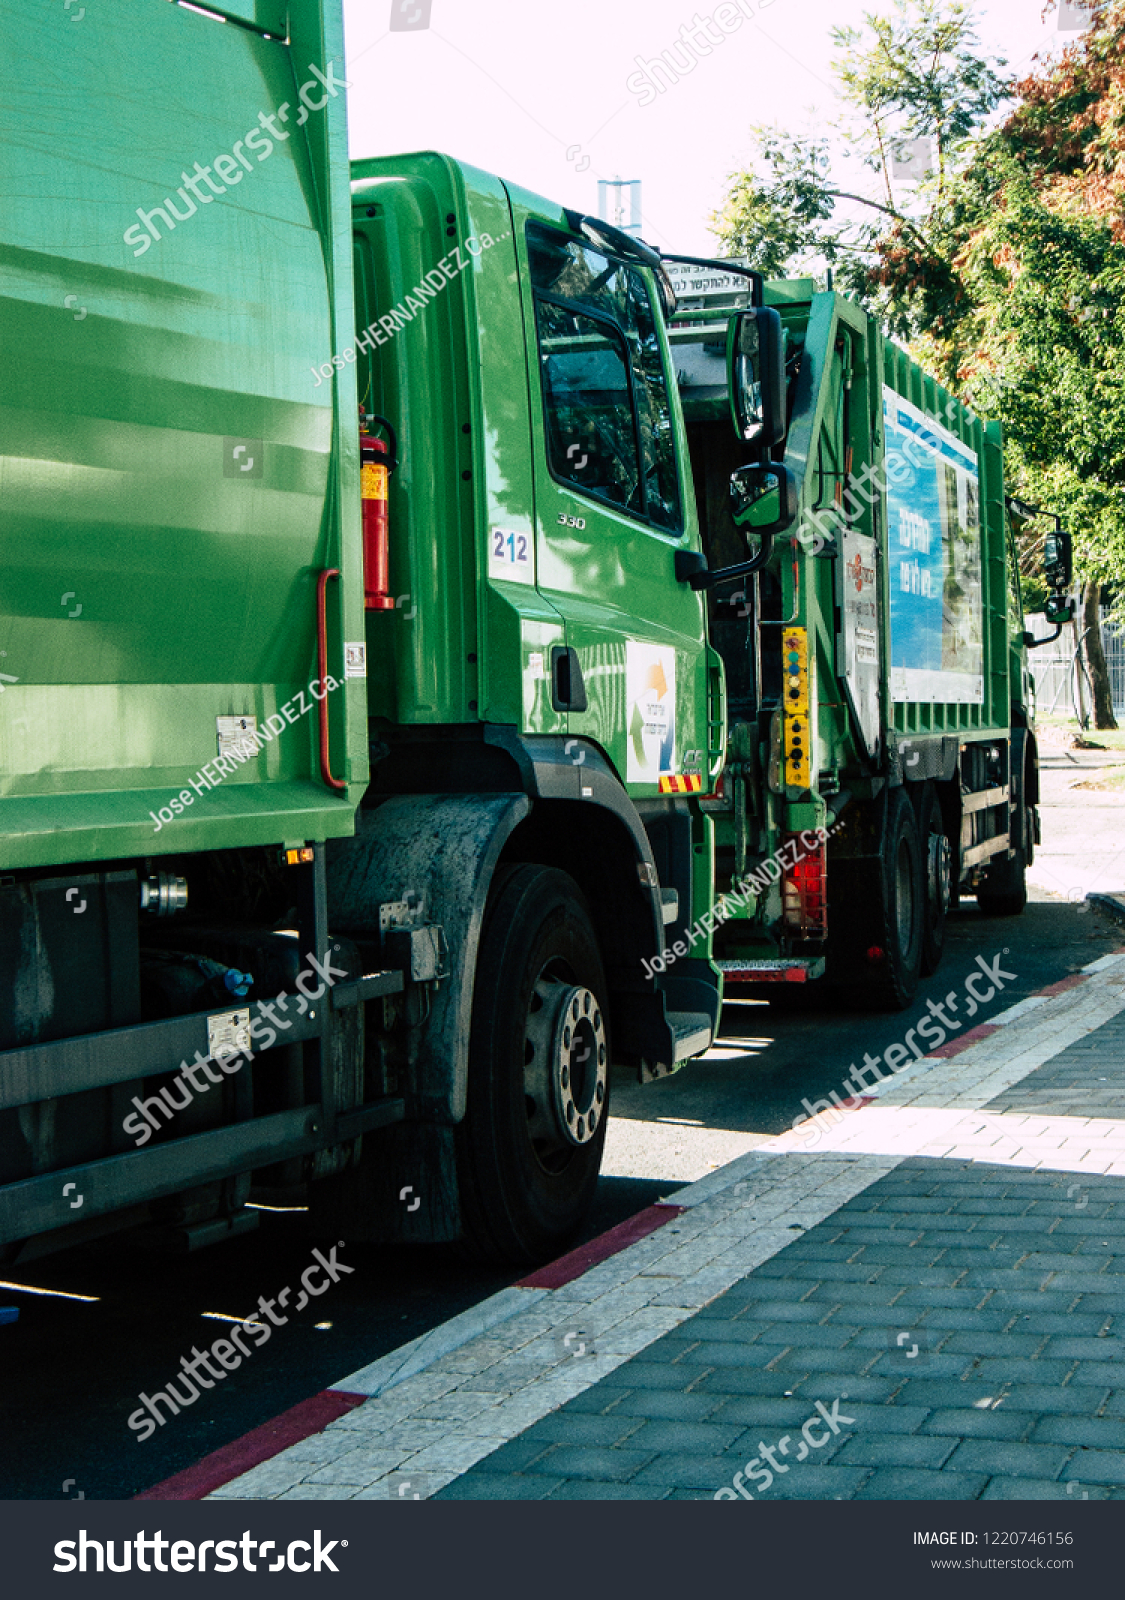 Tel Aviv Israel October 25, 2018  View of a green garbage truck parked in the streets of Tel Aviv in the afternoon #1220746156